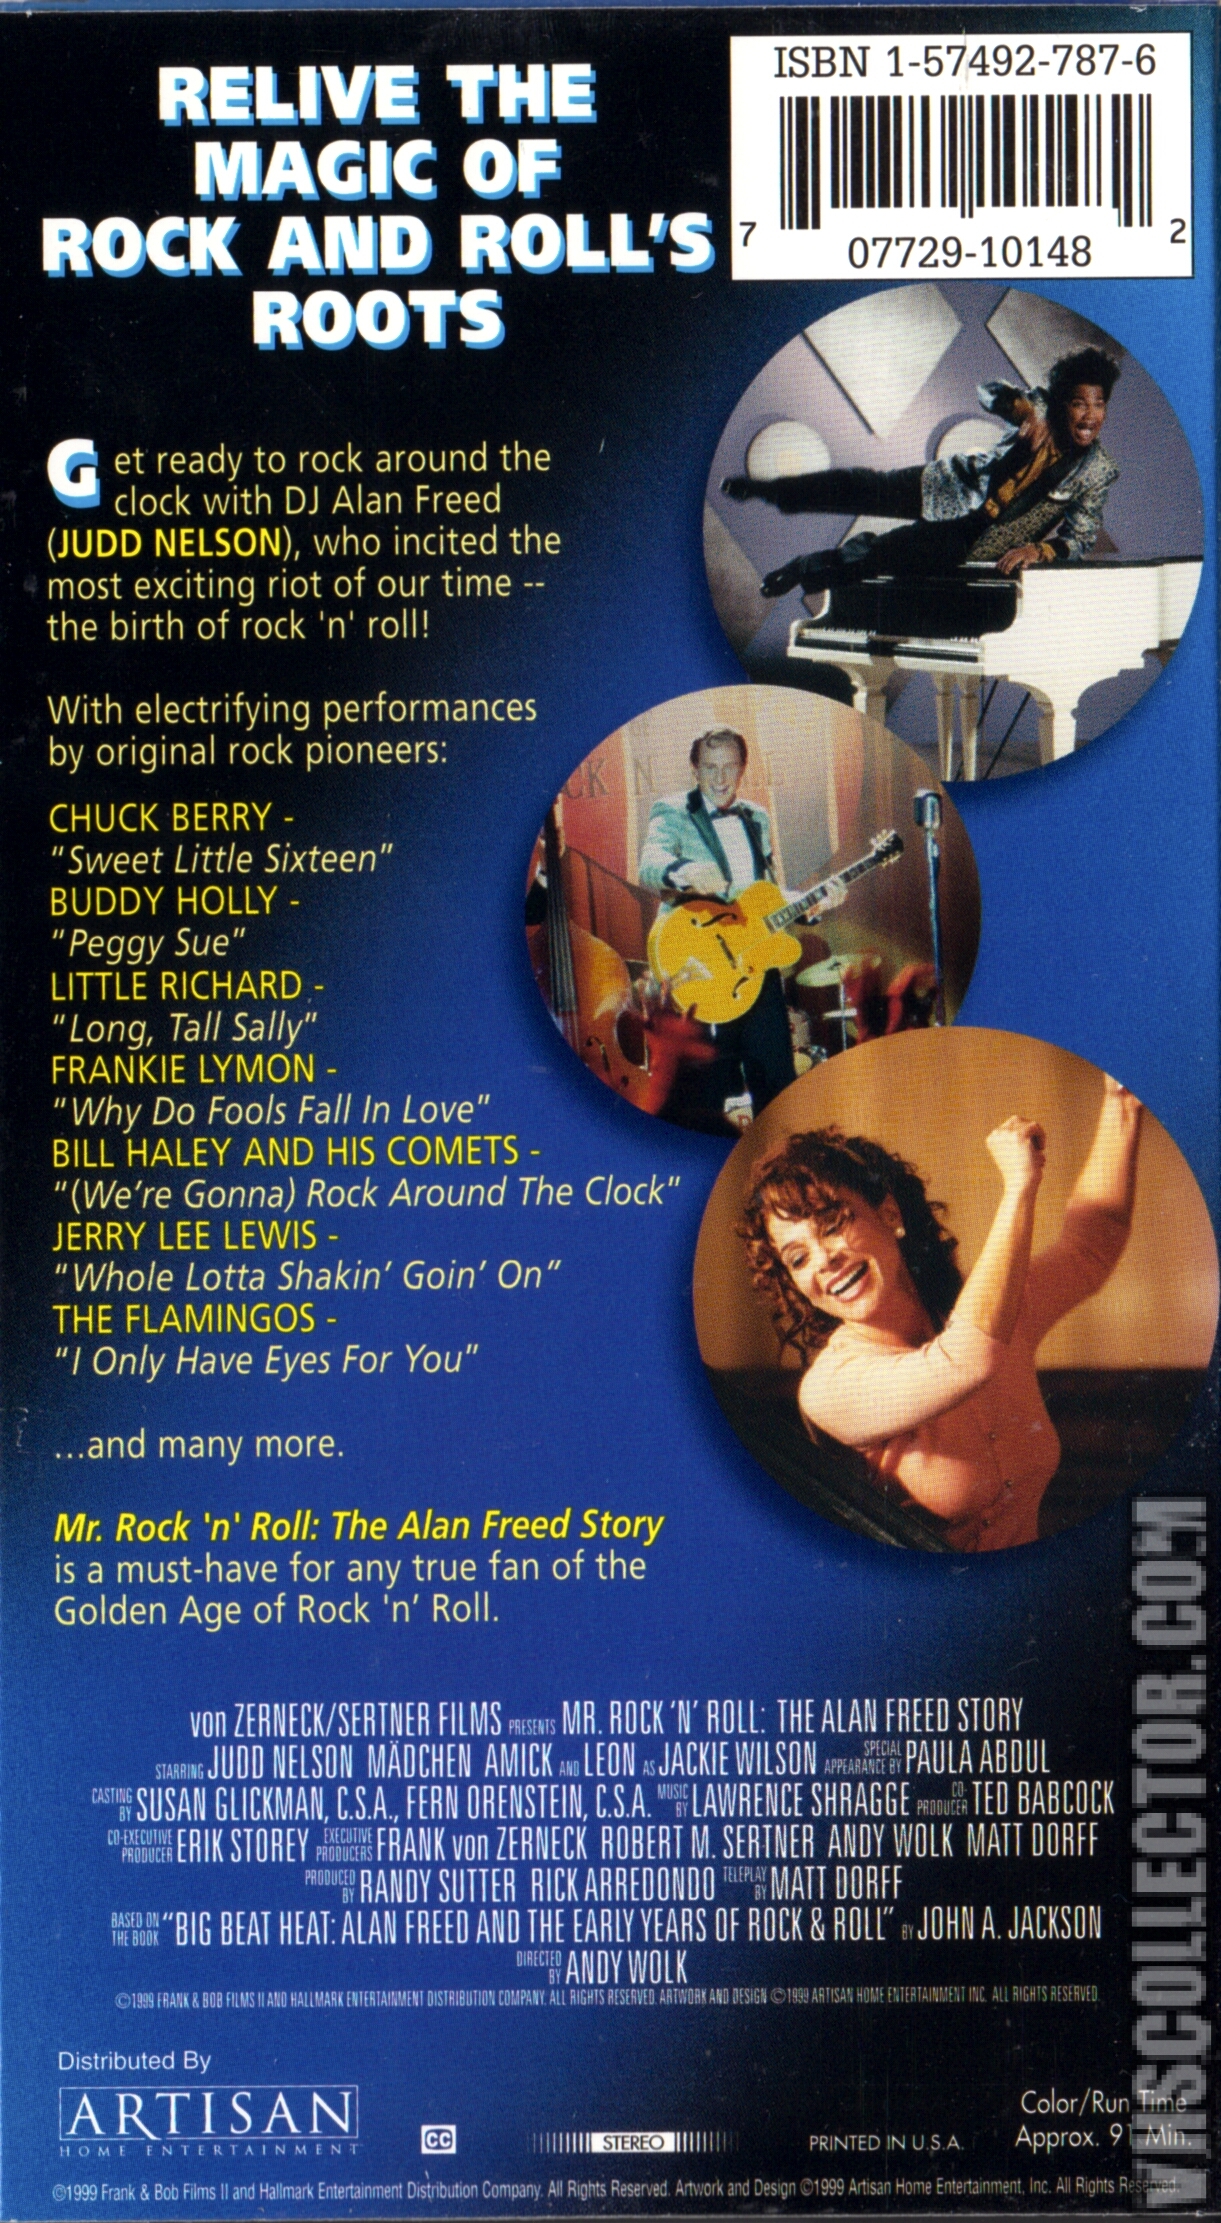 Mr. Rock 'n' Roll: The Alan Freed Story | VHSCollector.com